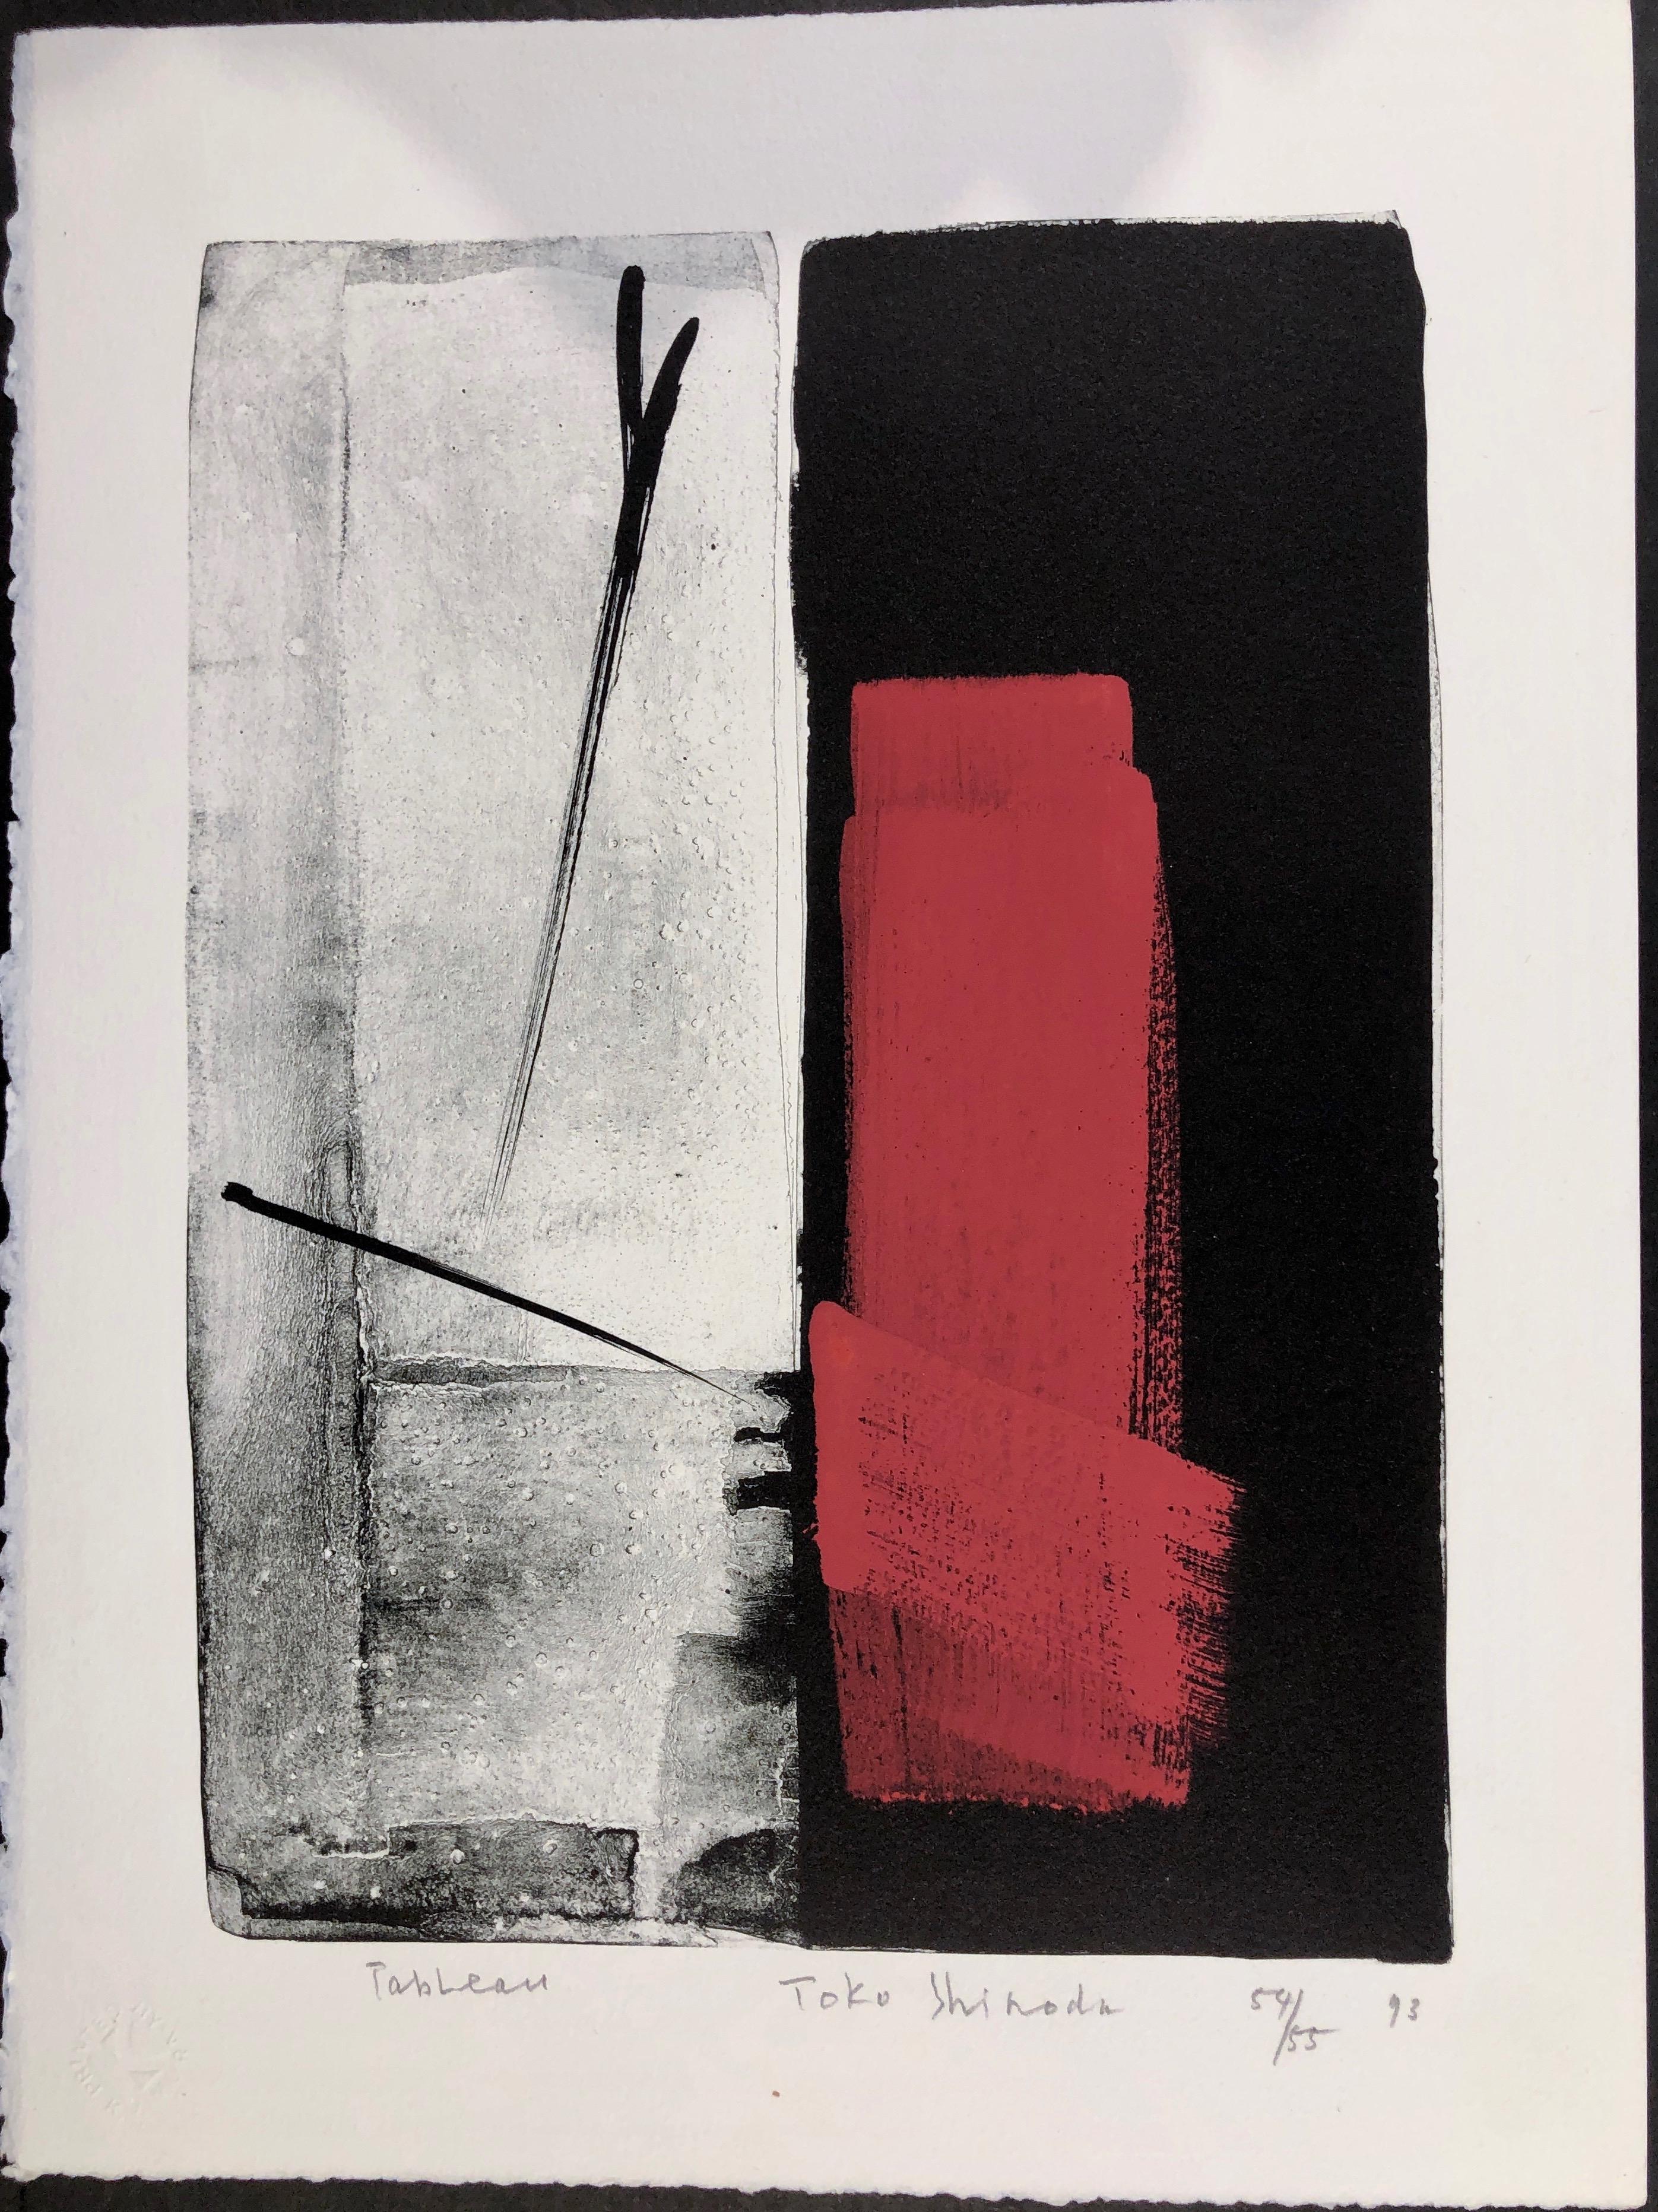 Tableau, Japanese, limited edition lithograph, black, white, red, signed, number